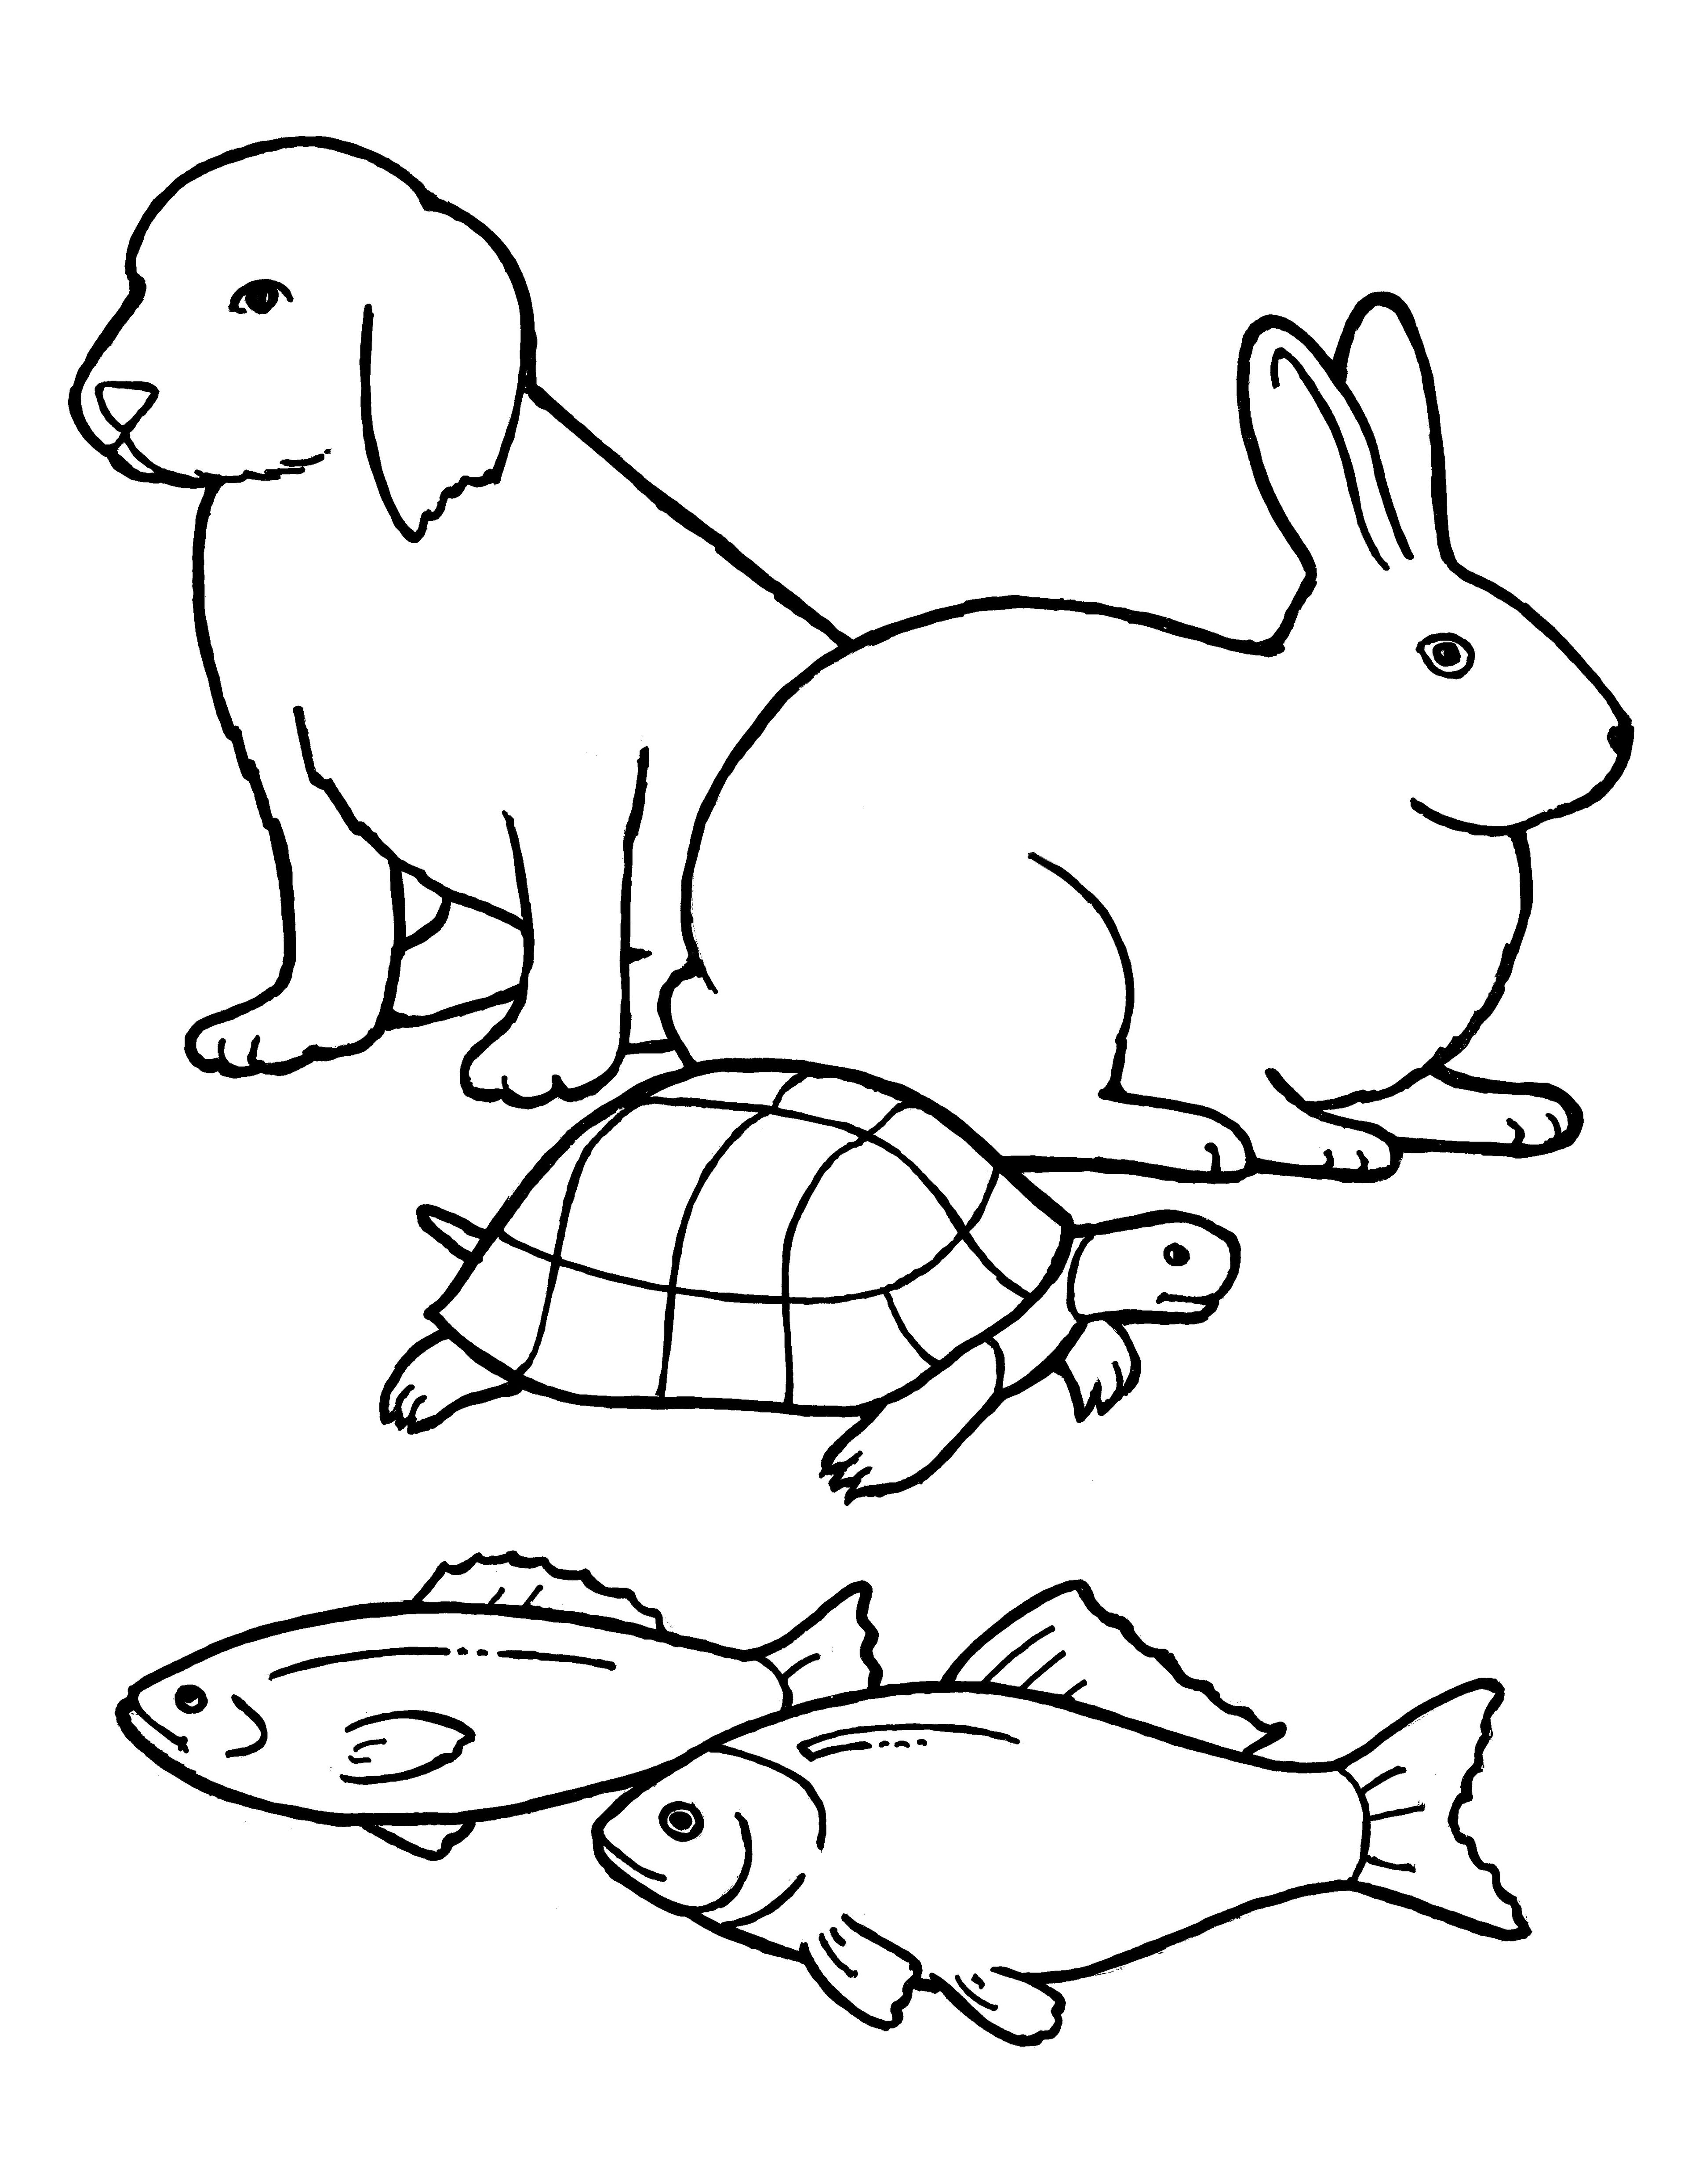 A line drawing of animals from the nursery manual Behold Your Little Ones (2008), page 35.